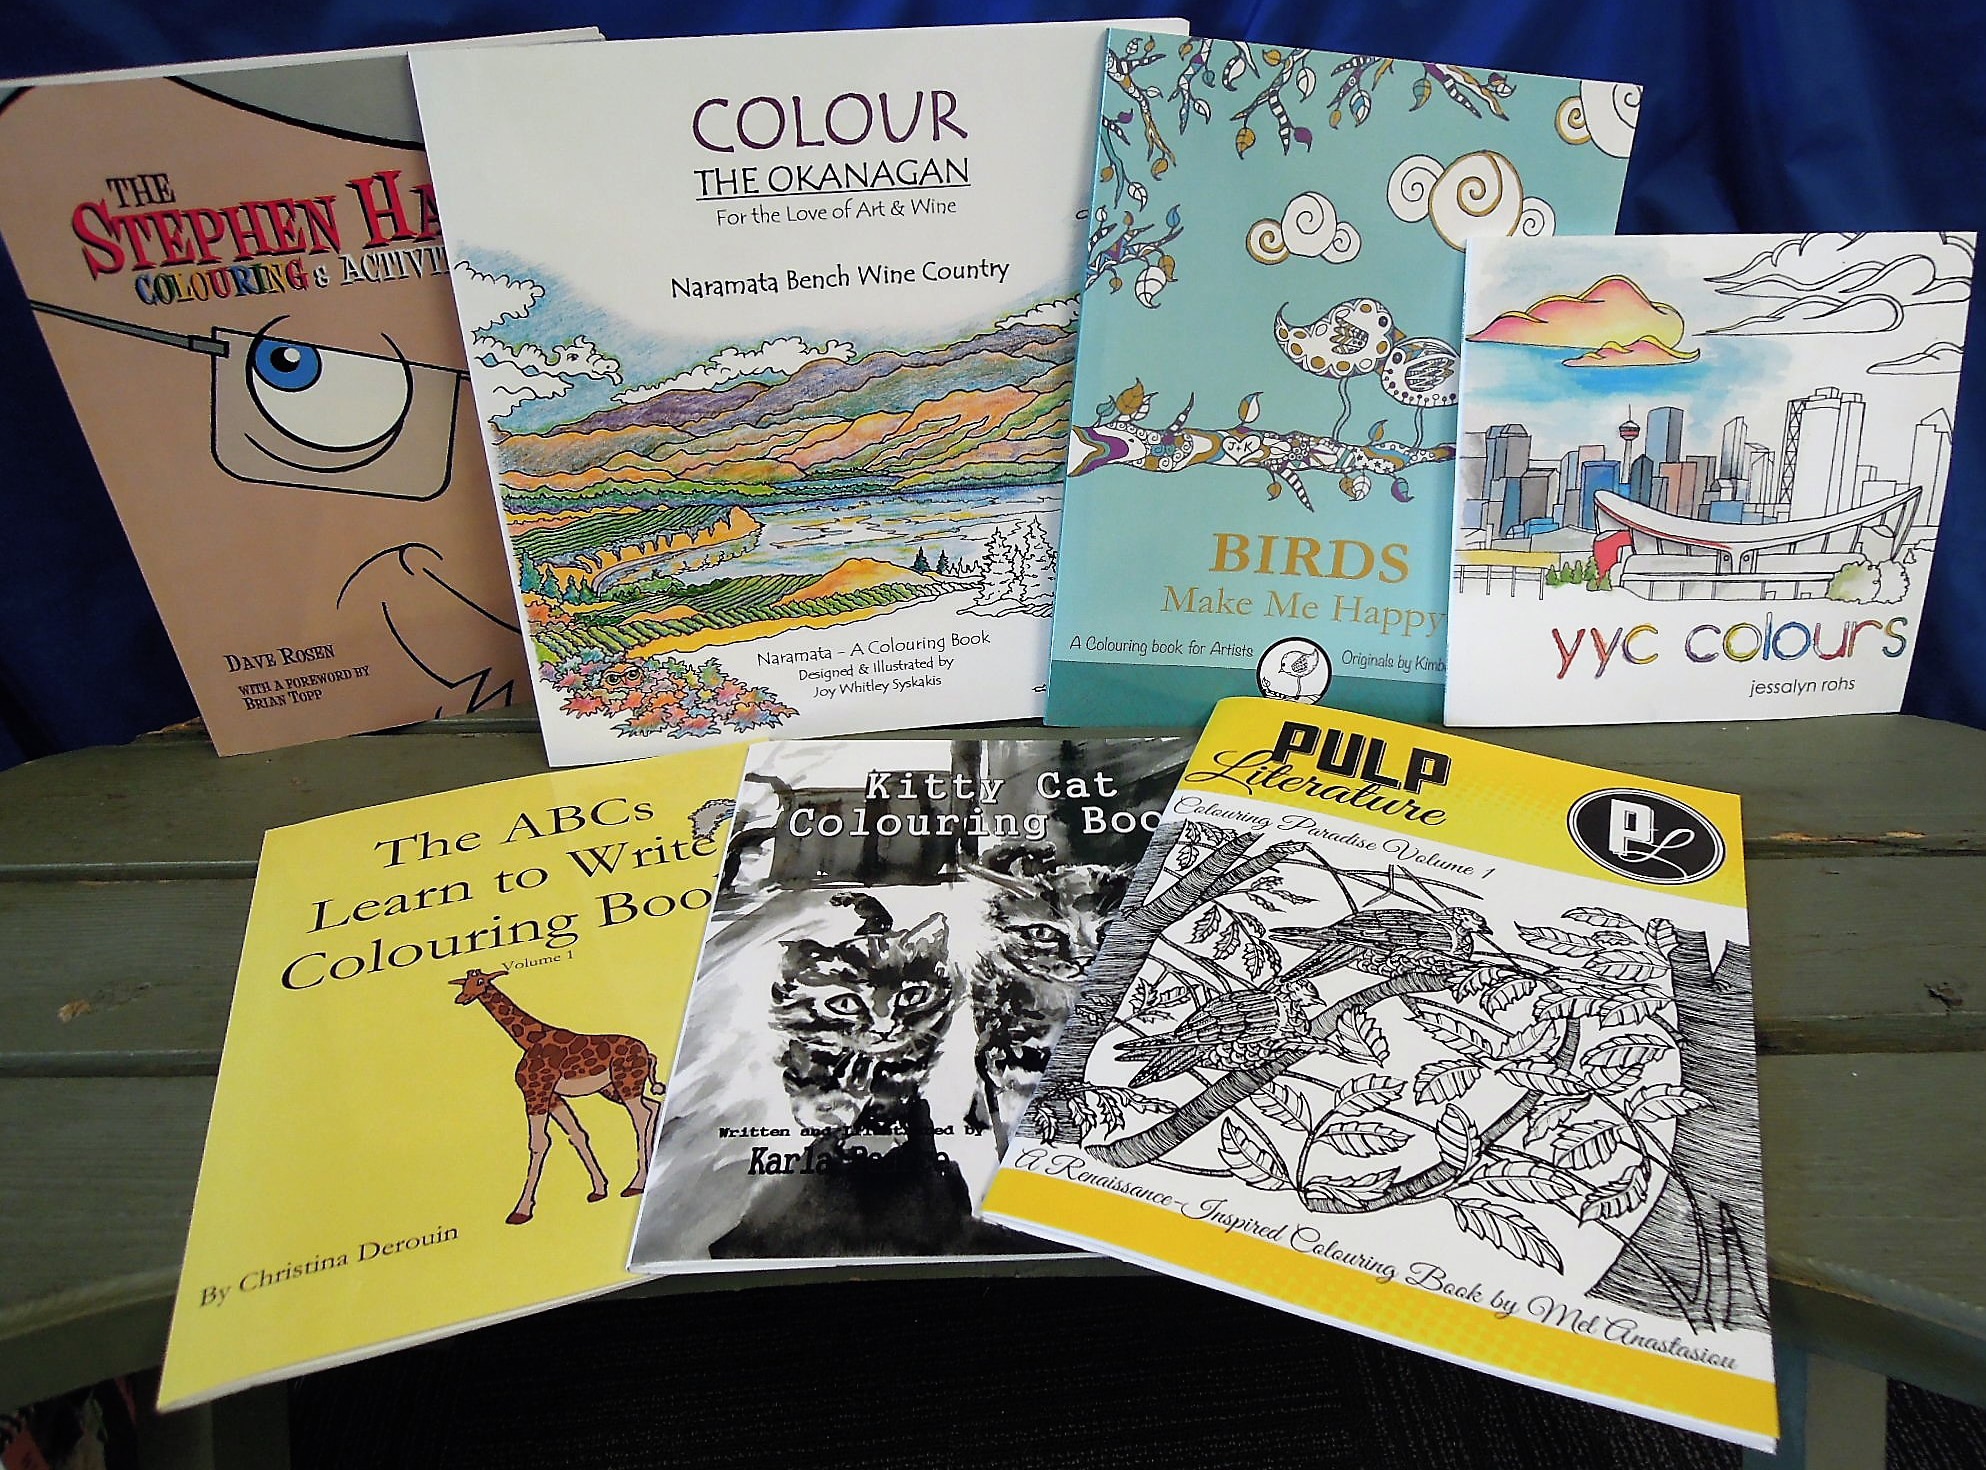 Four Tips On How To Create A Better Coloring Book  Self Publishing Canada  & US, Book Print & Design, Bind, eBooks